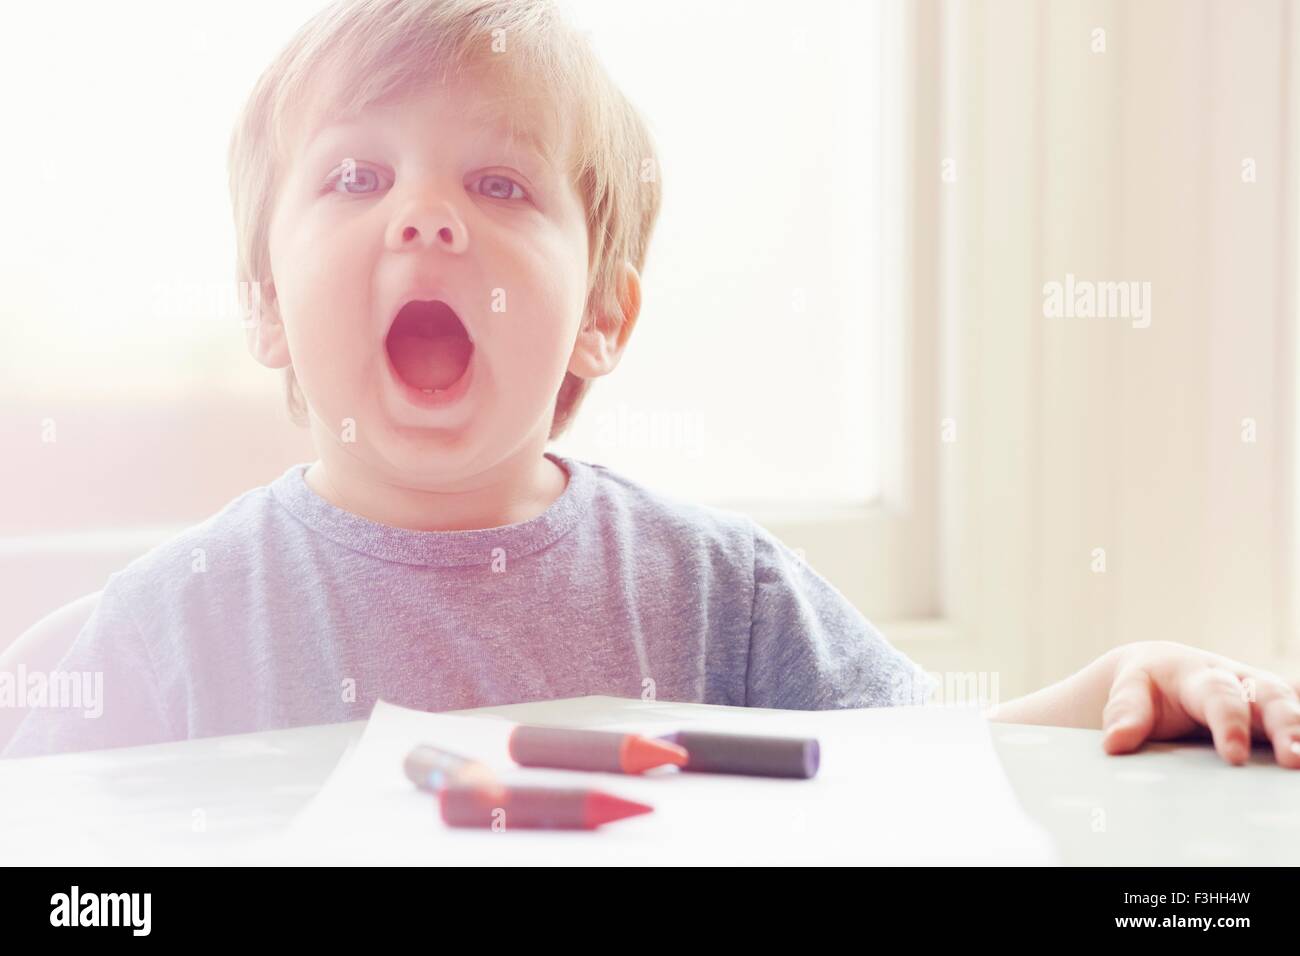 Boy at table with crayons, looking at camera, open mouthed Stock Photo